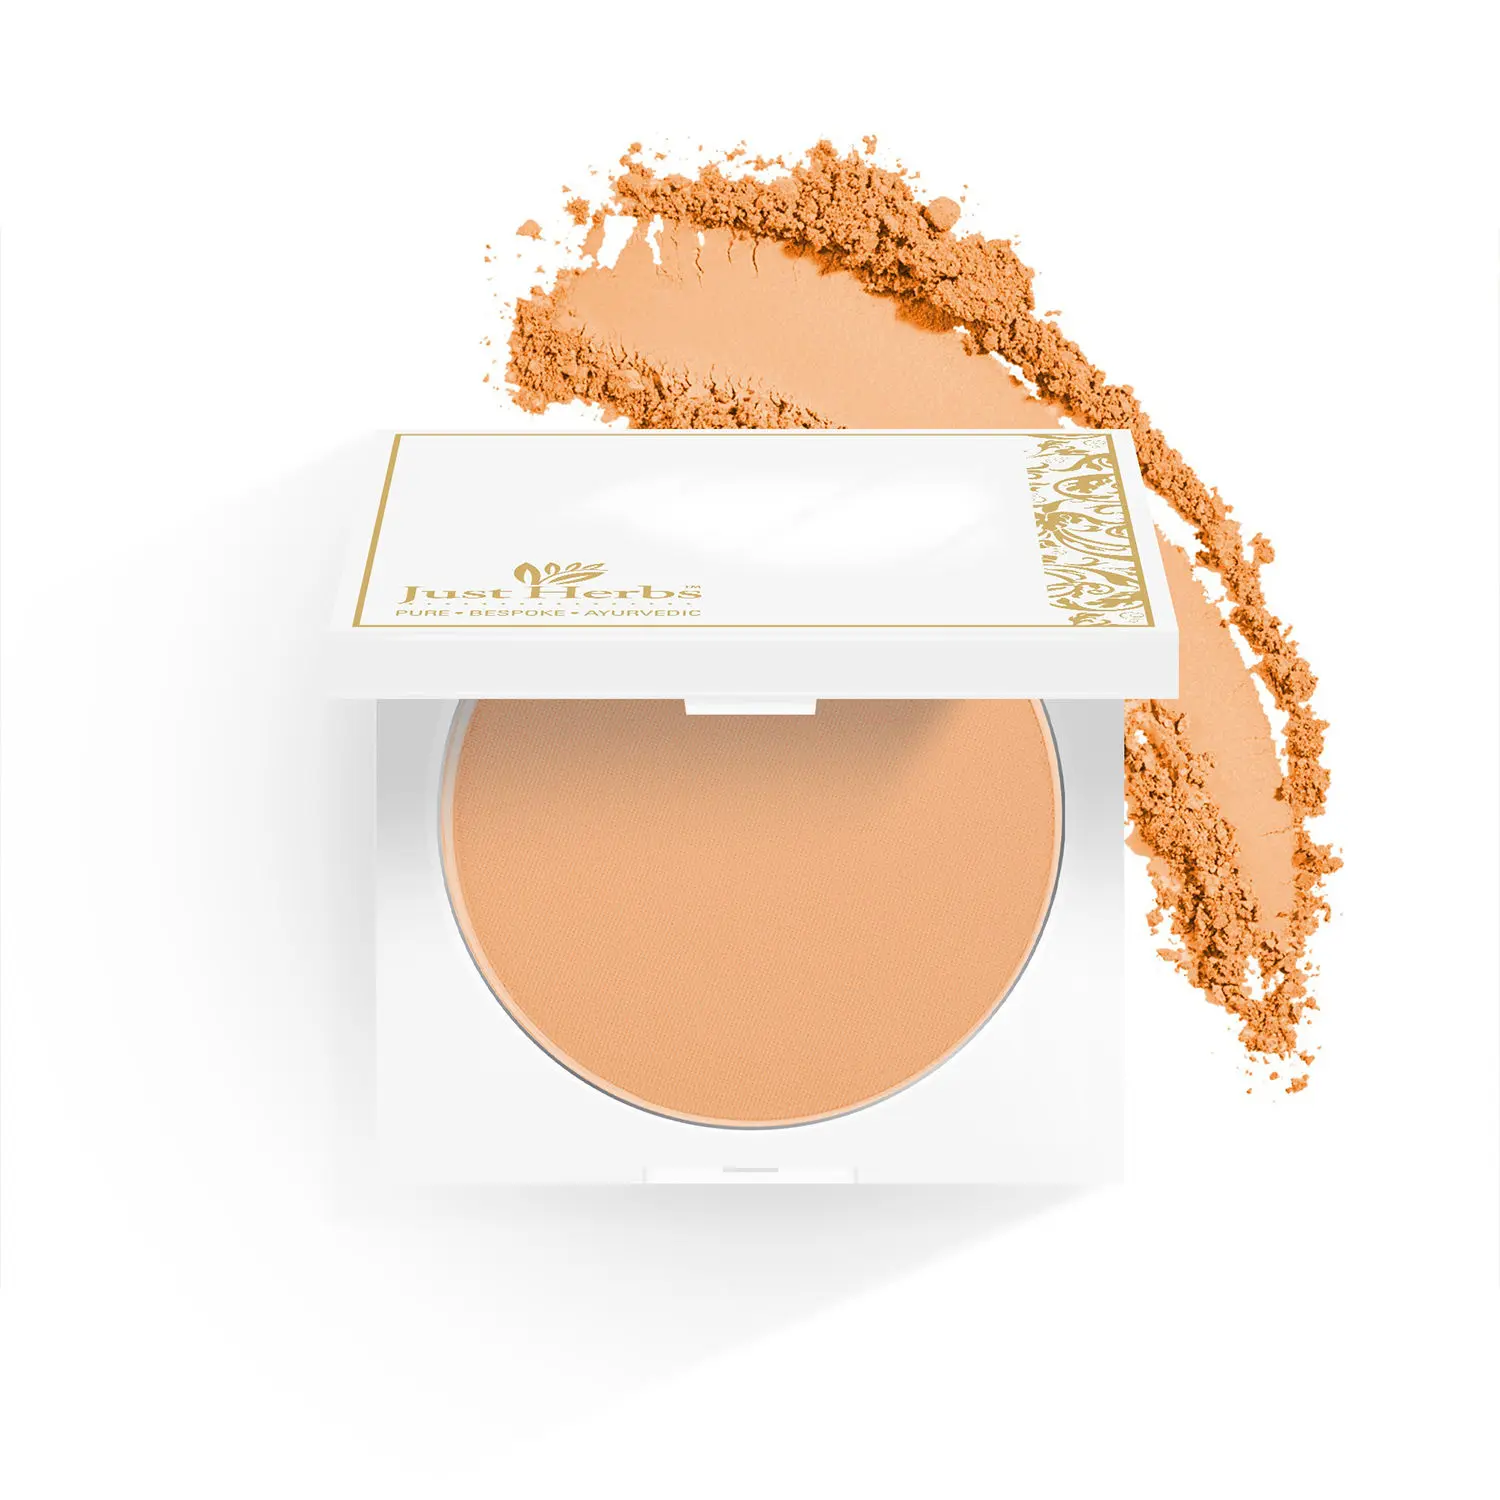 Just Herbs Compact Powder Mattifying & Hydrating With SPF 15 + For All Skin Types Talc & Fragrance Free - 01 Porcelain